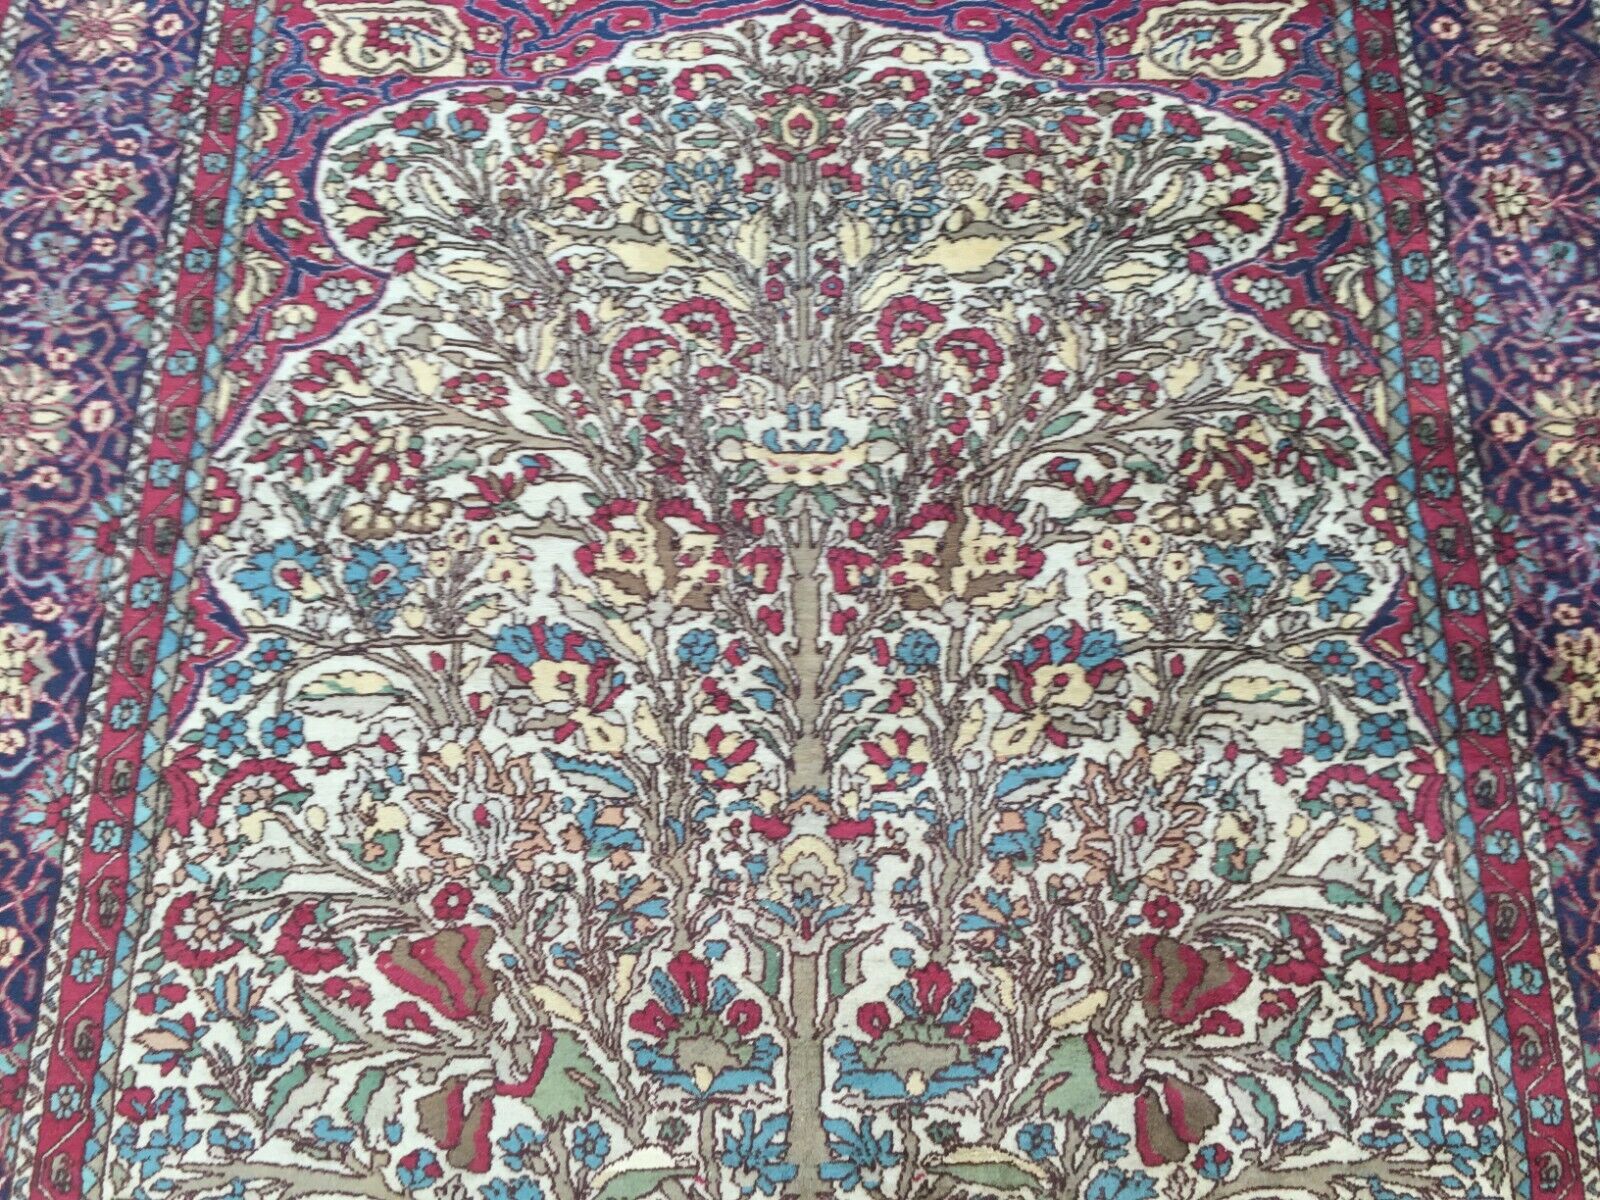 Animals Woven into Fabric Adding Depth and Symbolism on Antique Kerman Rug - 1920s